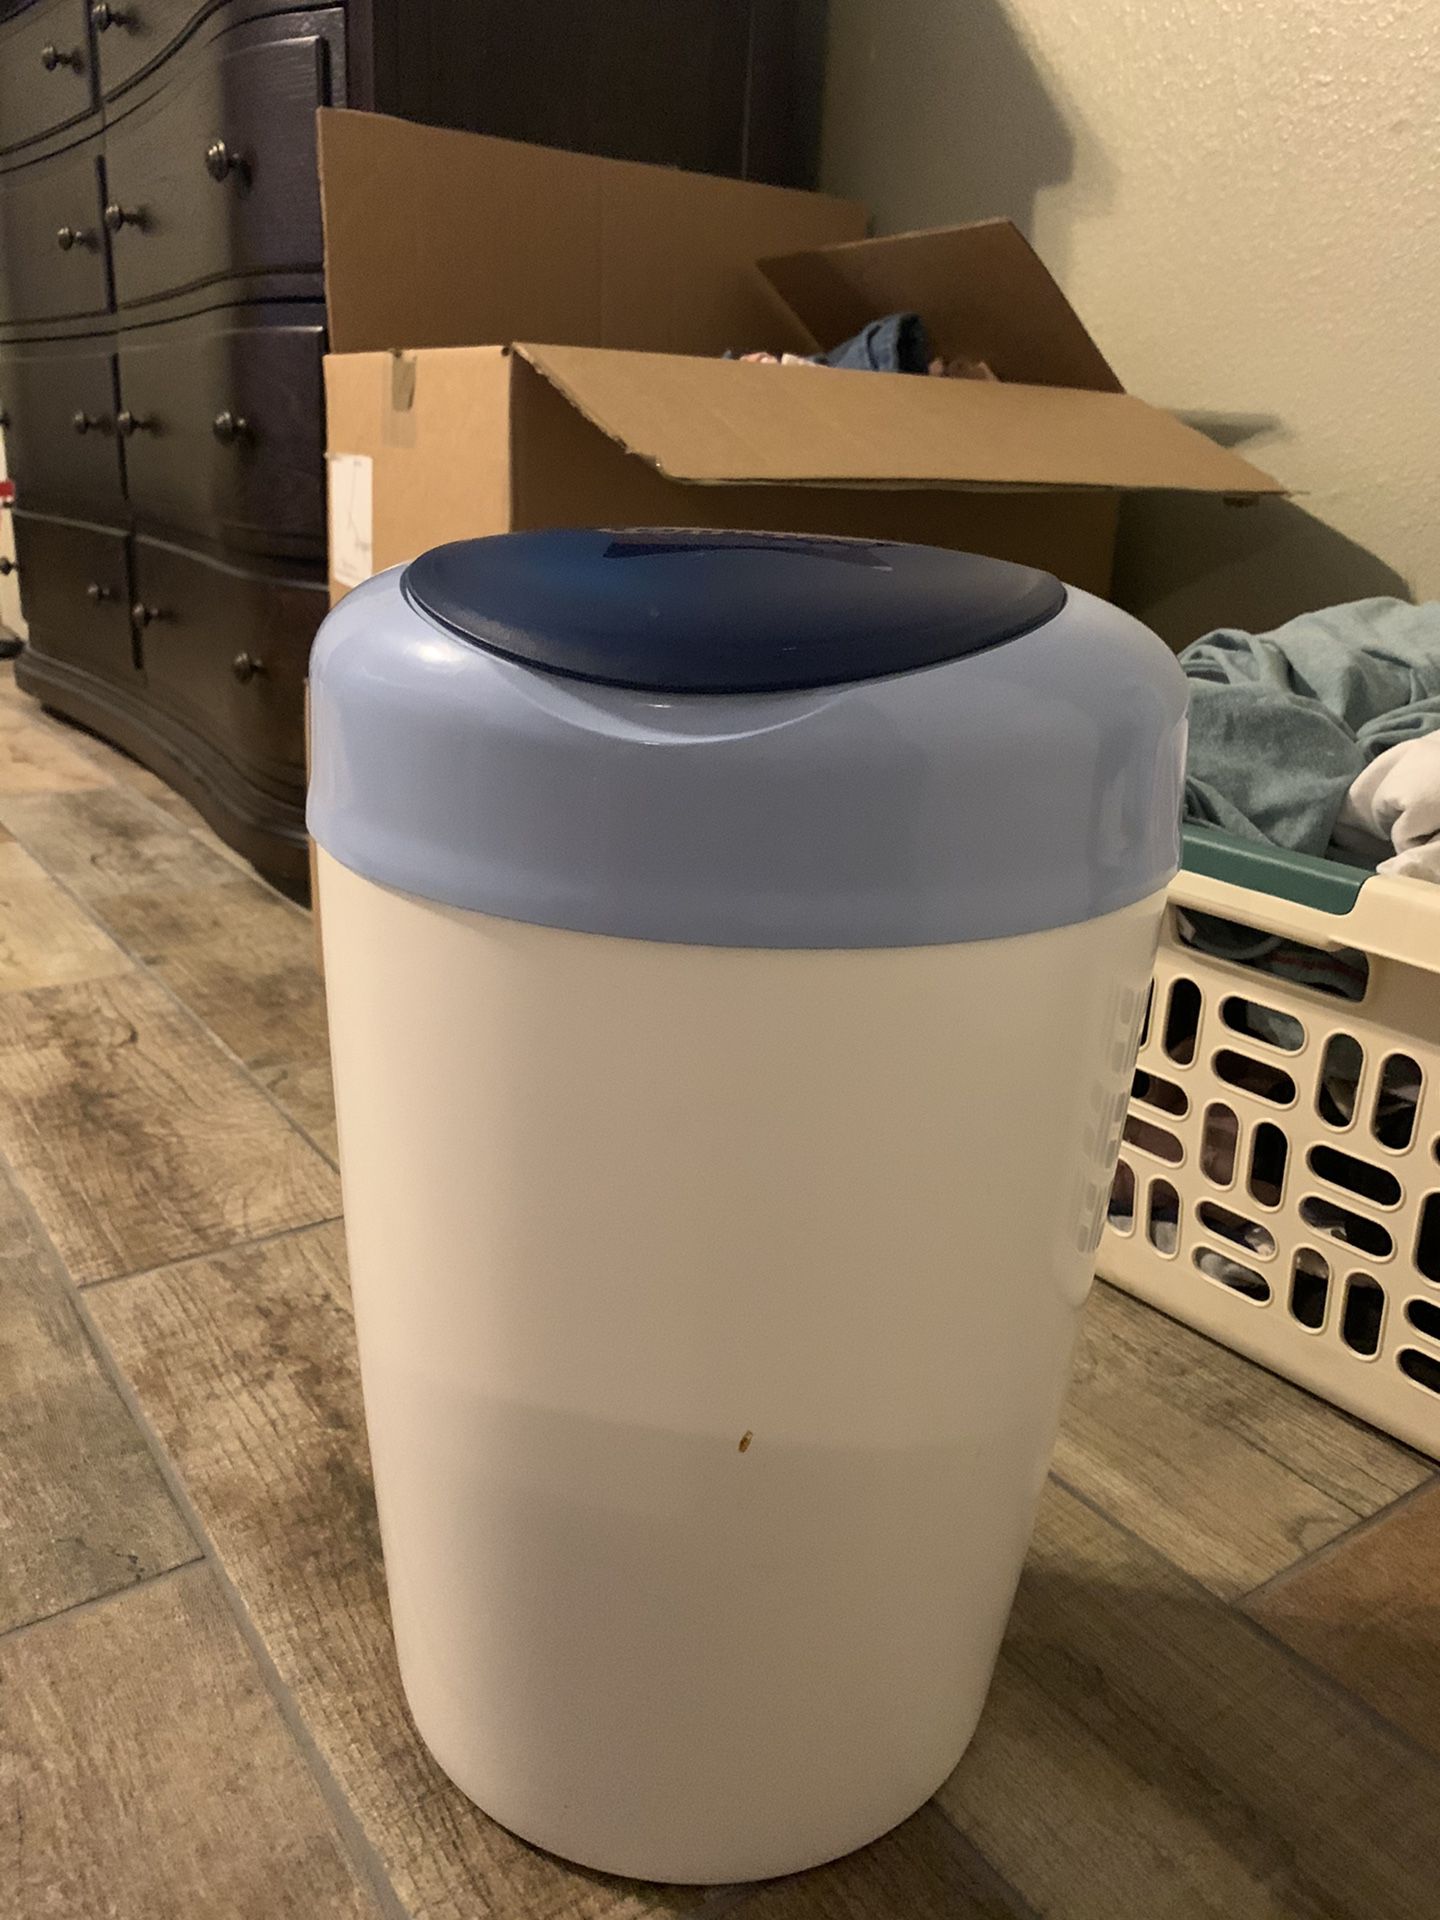 Tommie Tippee Diaper Pail